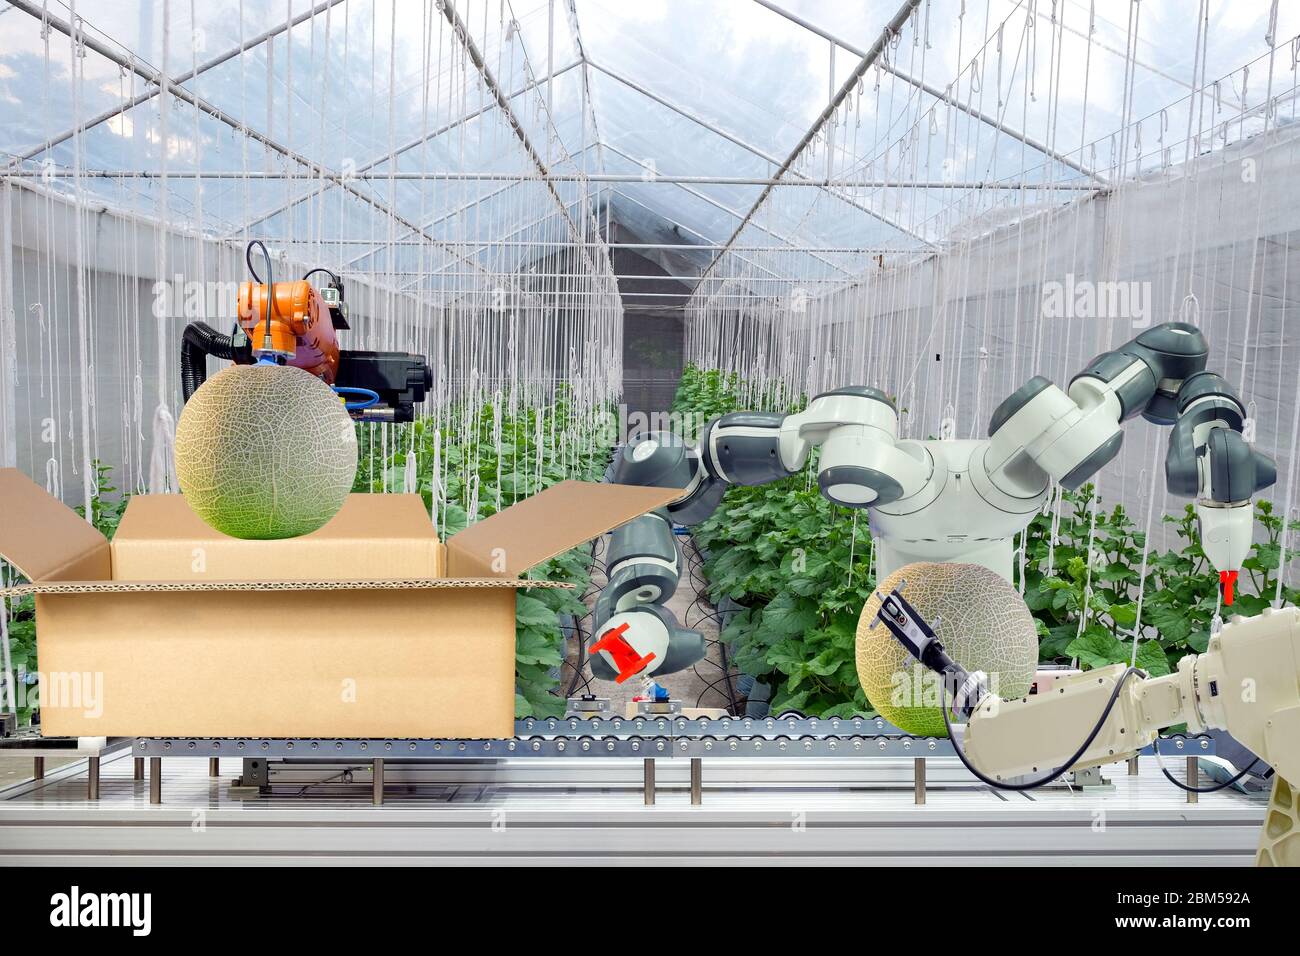 Industrial robot that were apply for agricultural to work packing the melon put on cardboard box via conveyor belt, industry 4.0 and smart farm 4.0 Stock Photo